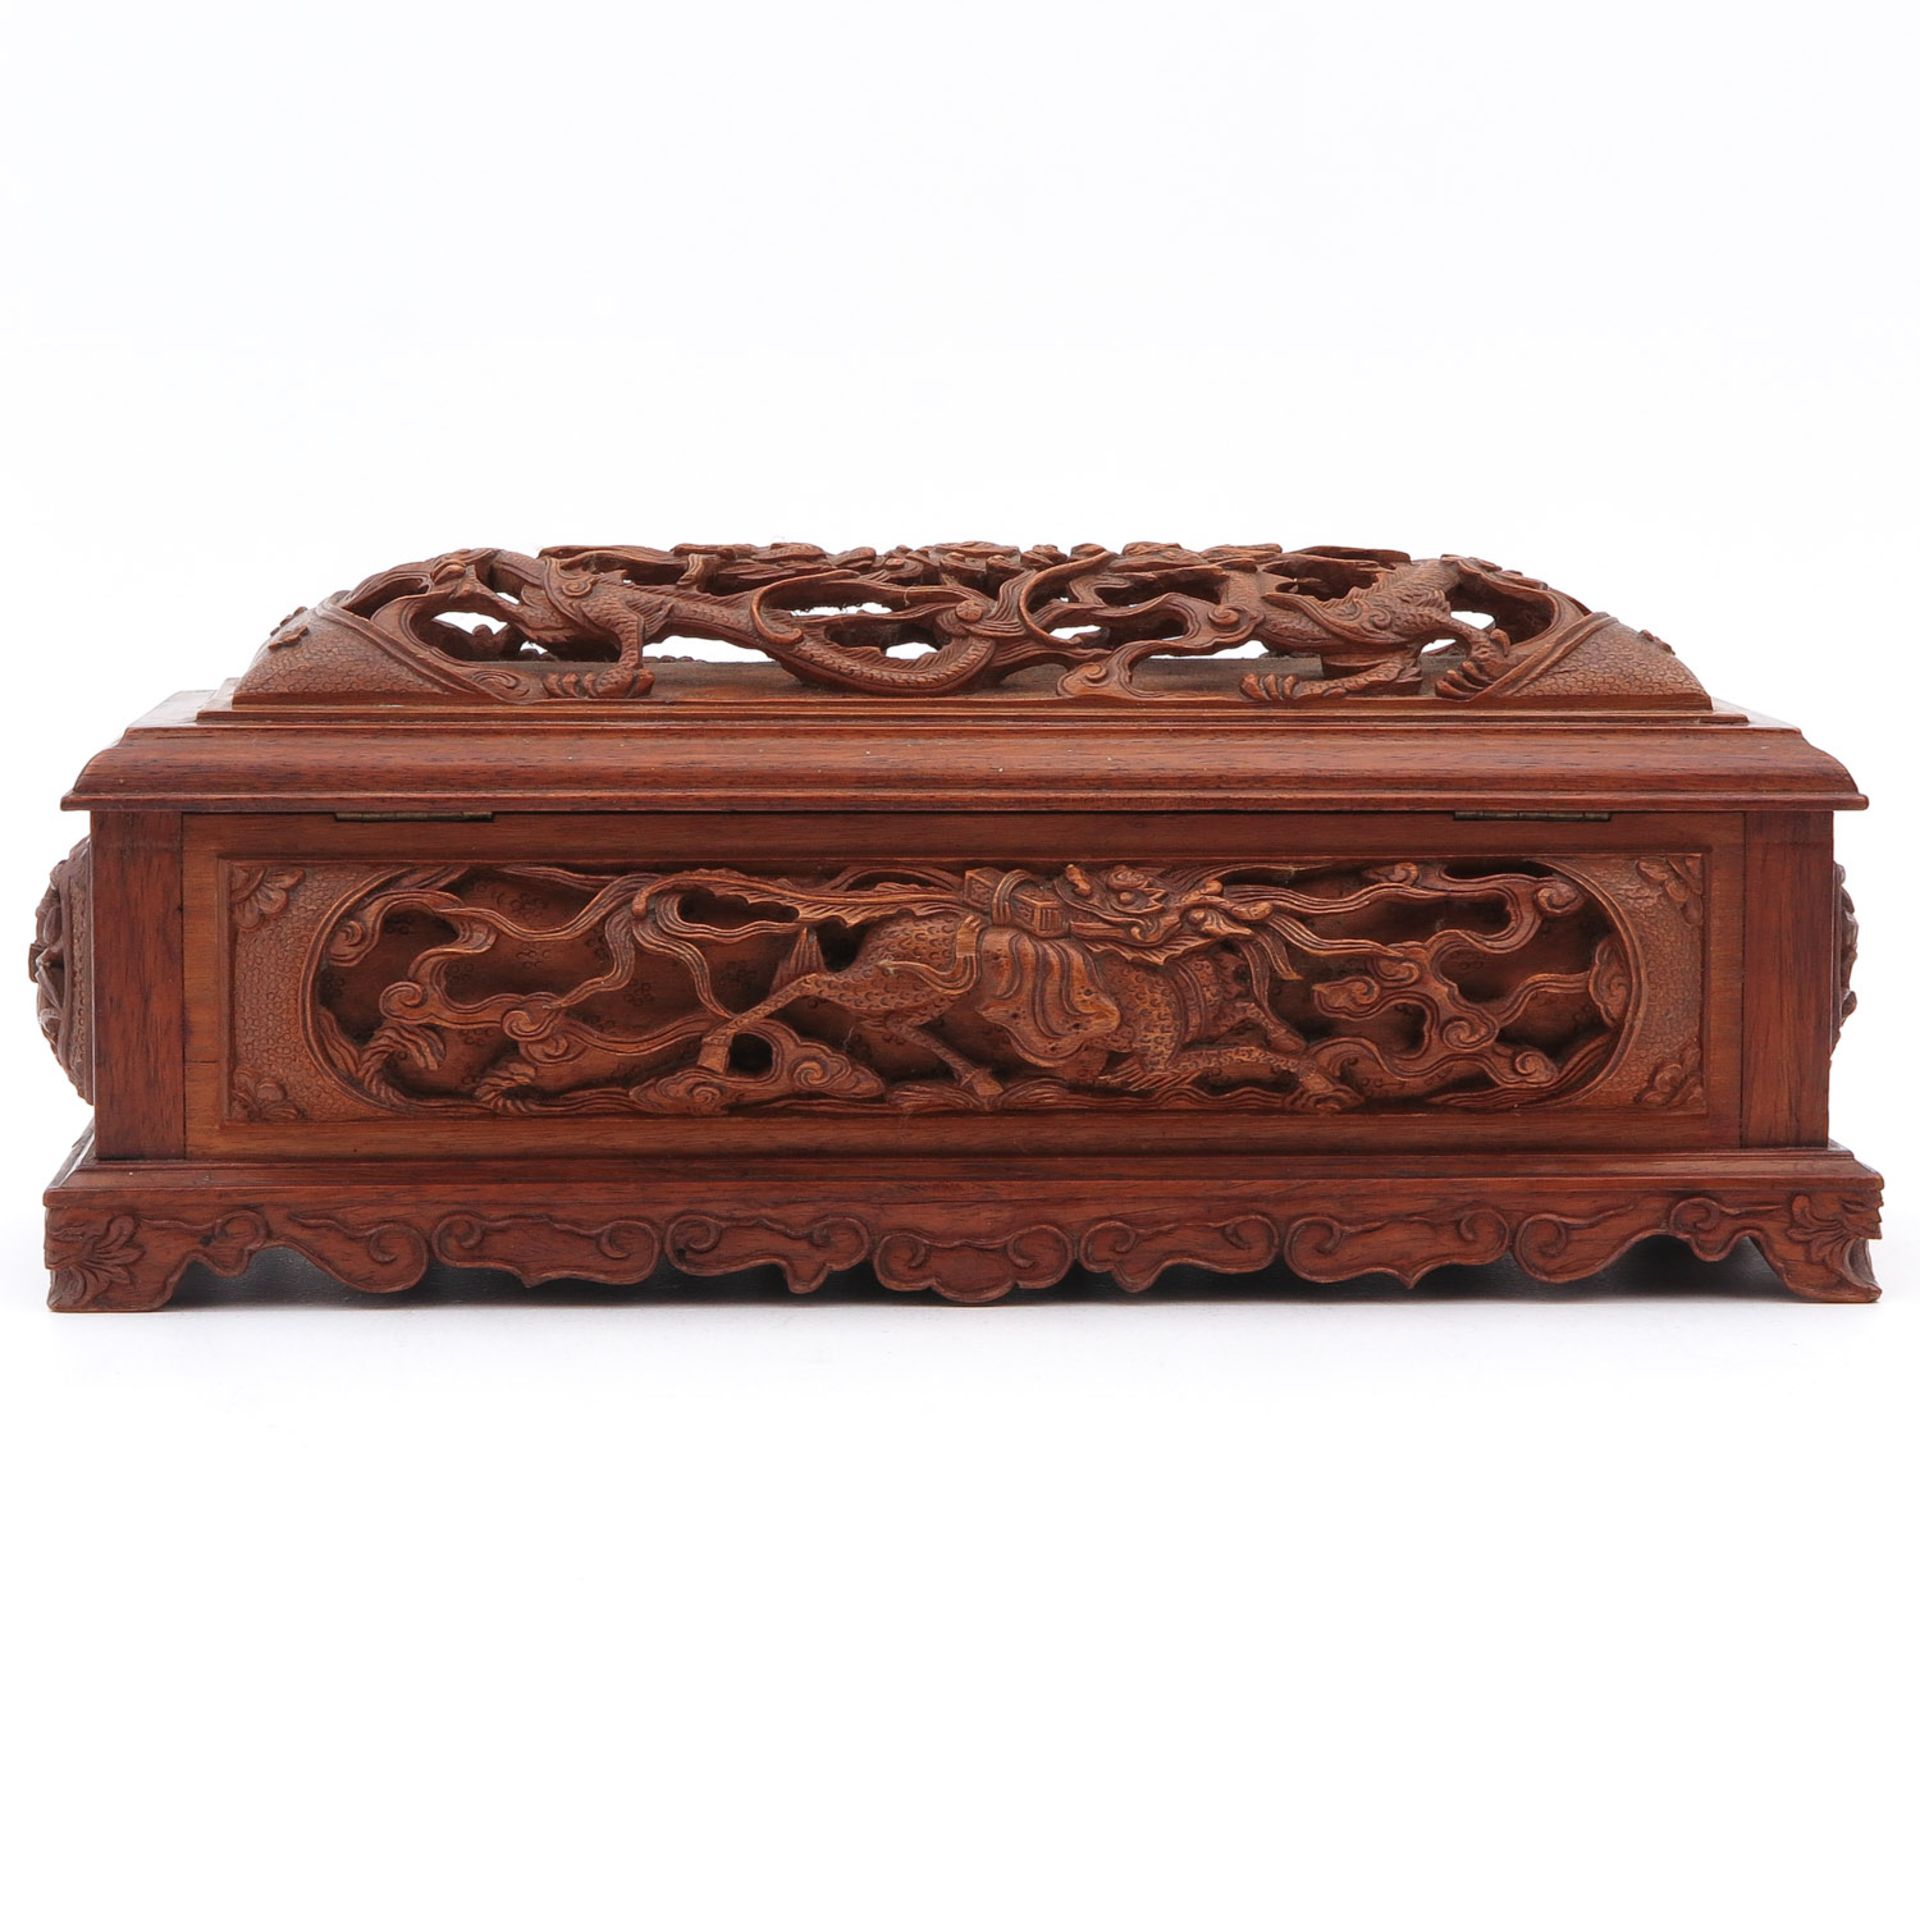 A Carved Wood Box - Image 3 of 10